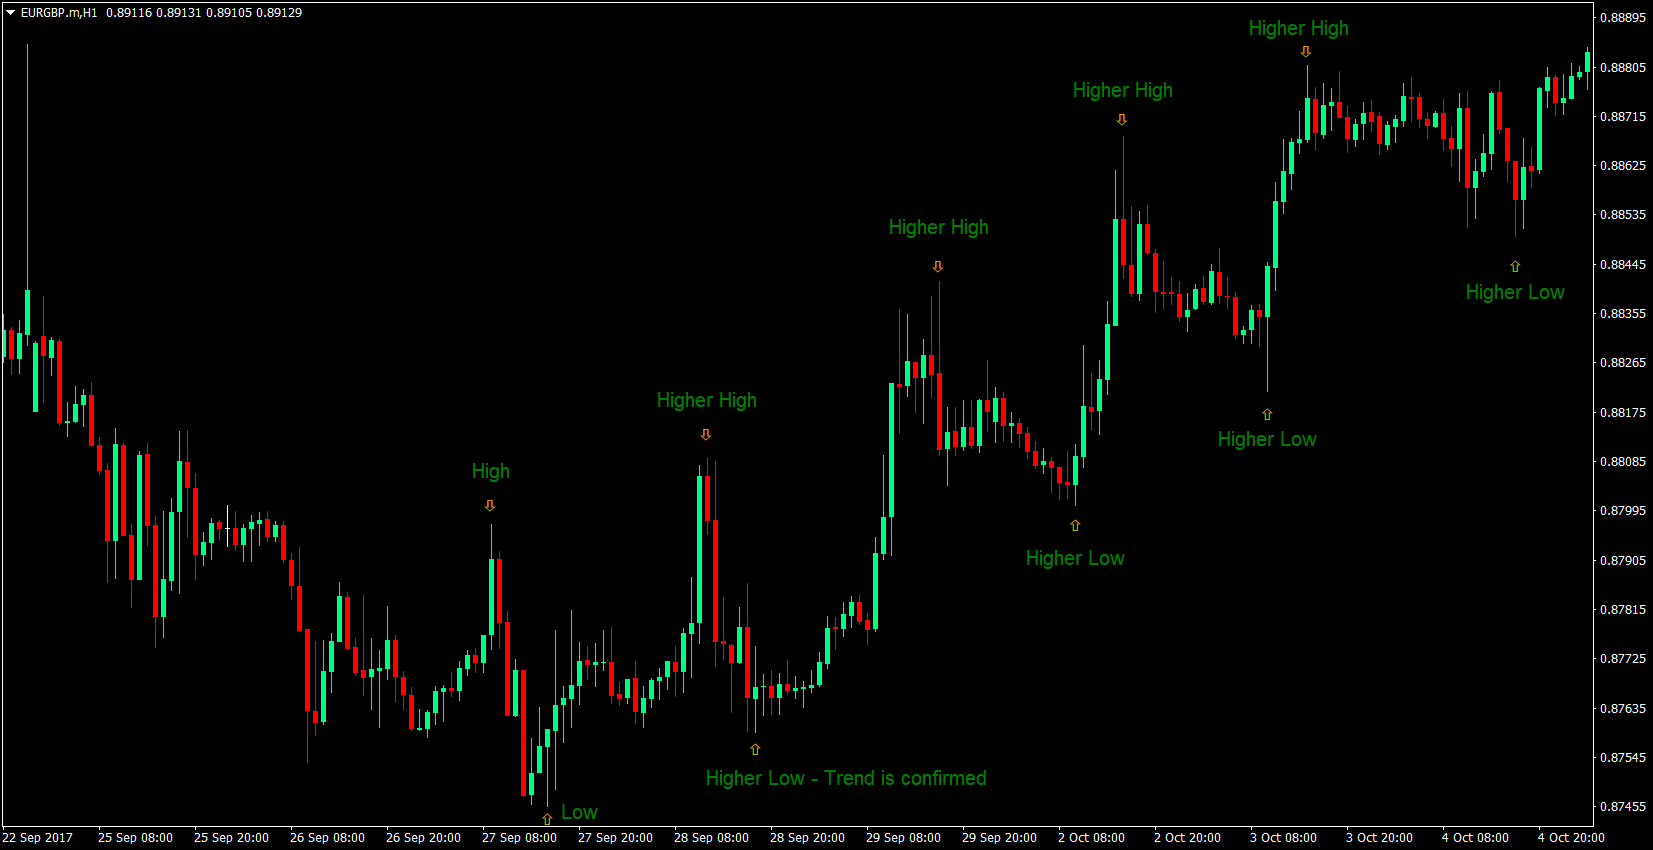 Trending Price Action Forex Strategy Forex Mt4 Indicators